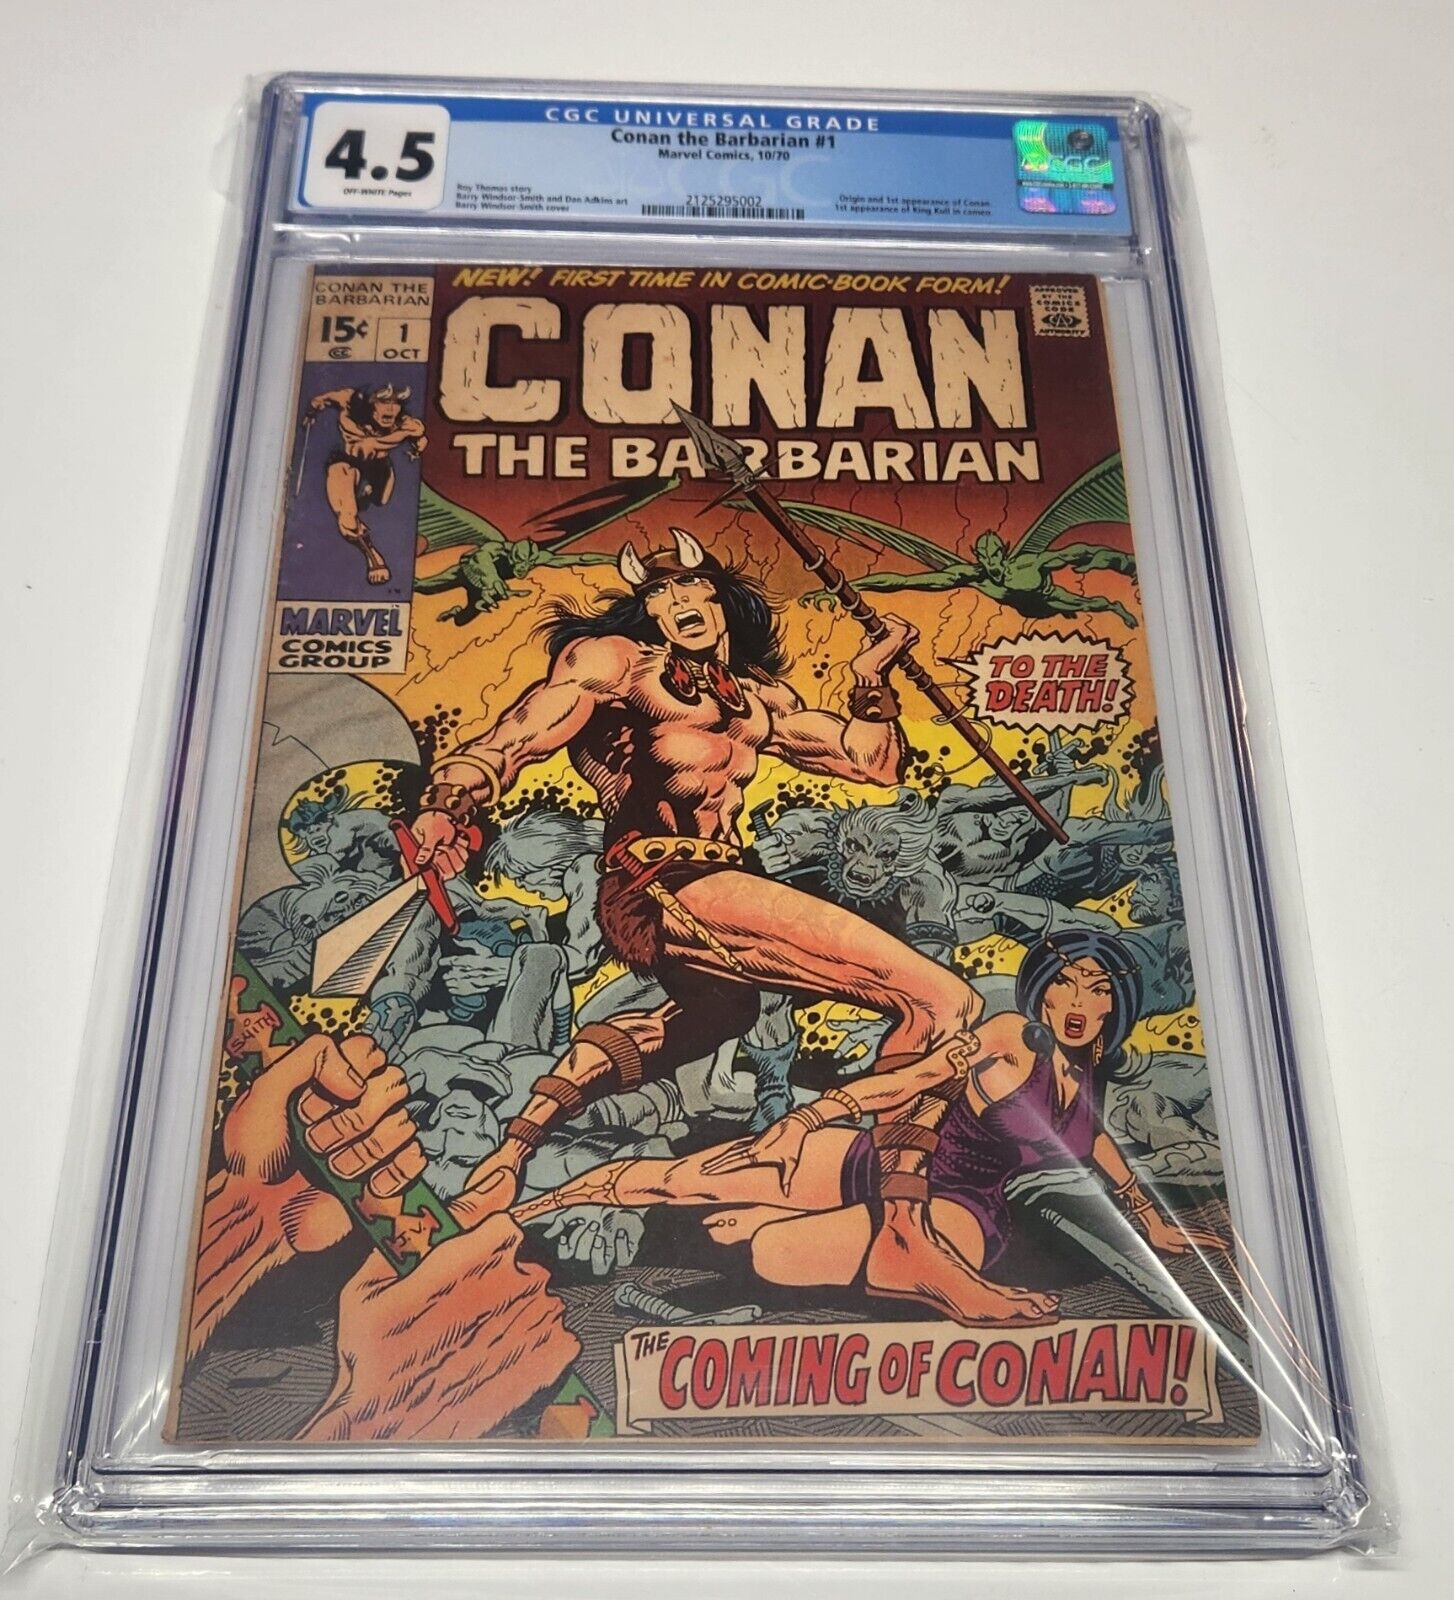 CONAN THE BARBARIAN #1 CGC 4.5 OFF-WHITE PAGES 